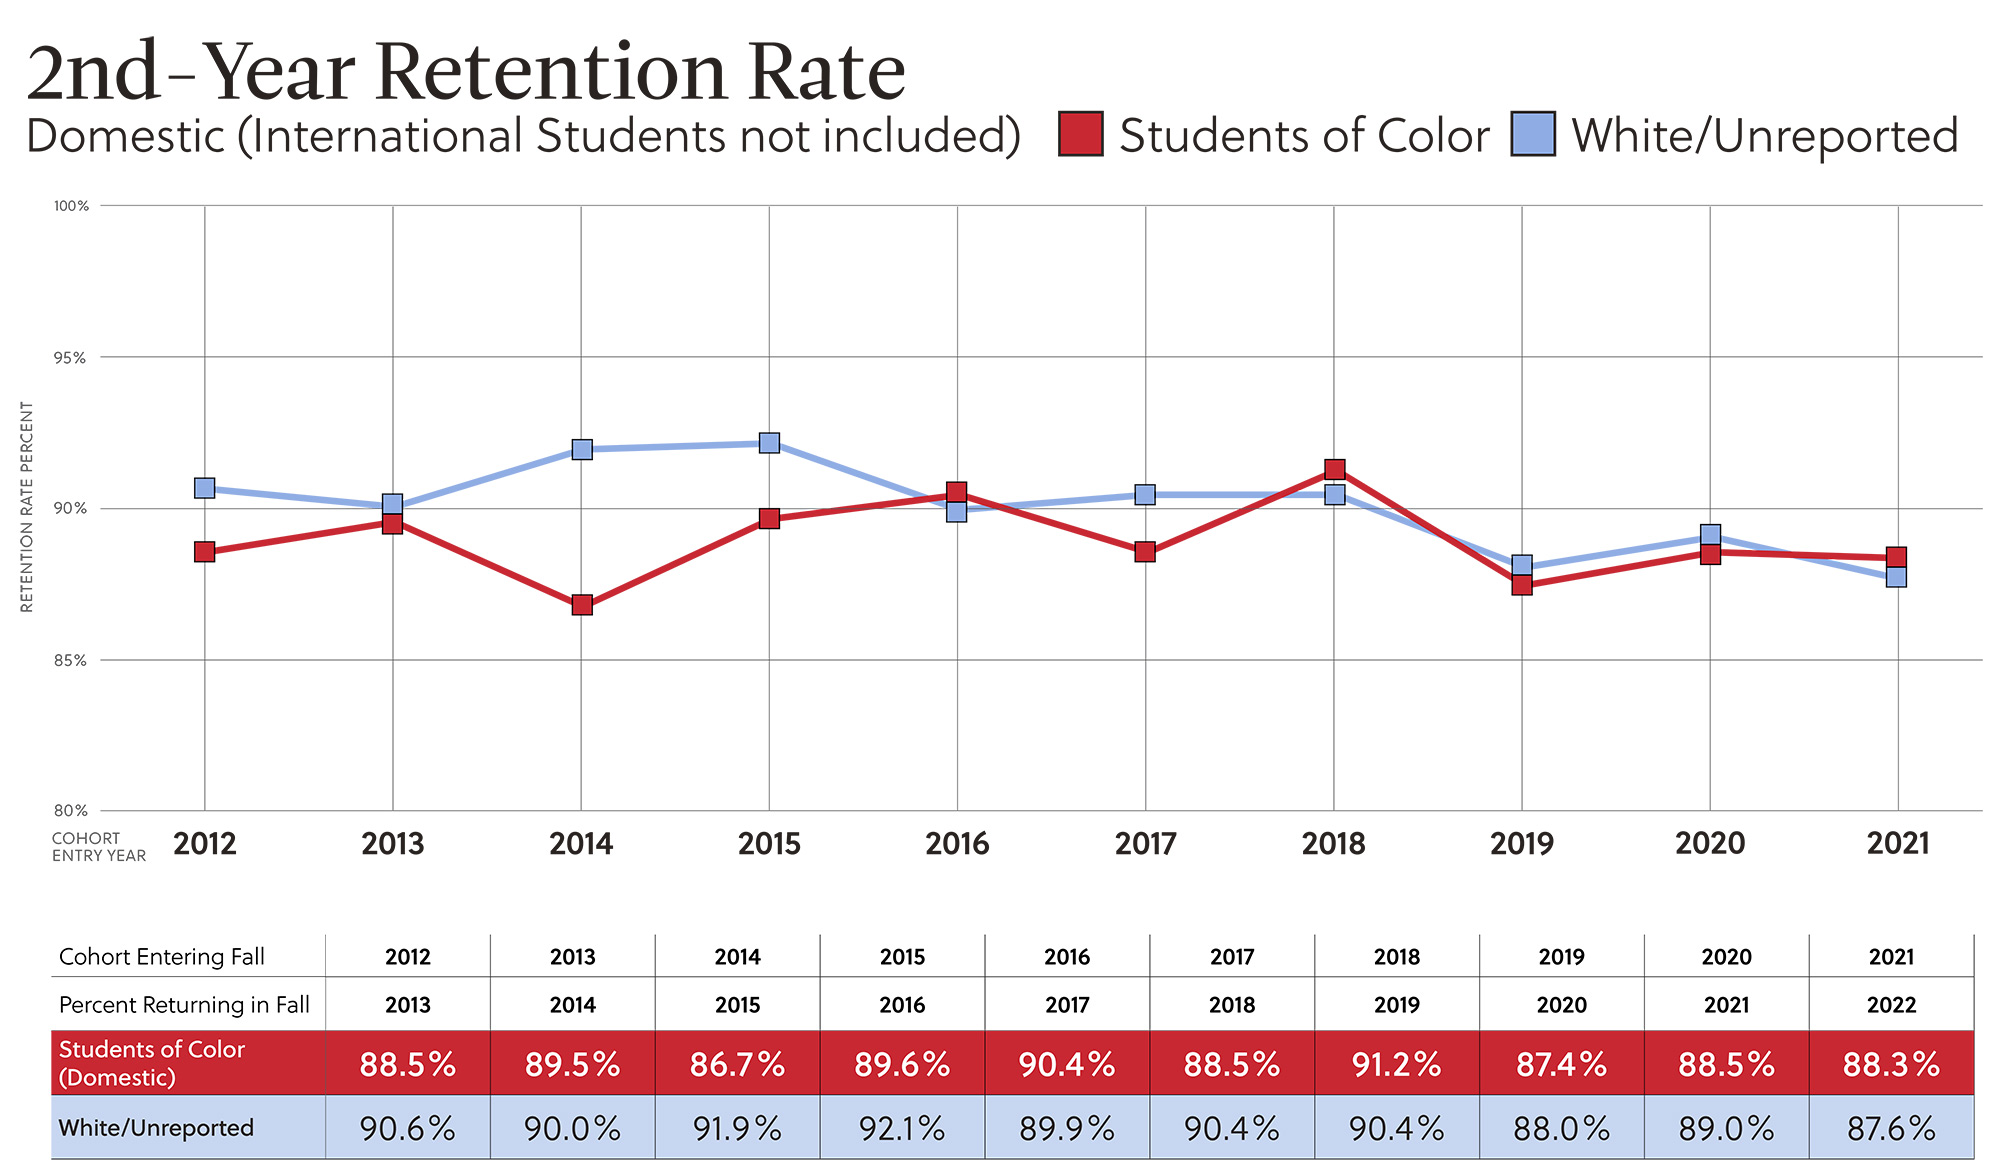 2nd-Year Retention Rate - Students of Color (Domestic) and White/Unreported